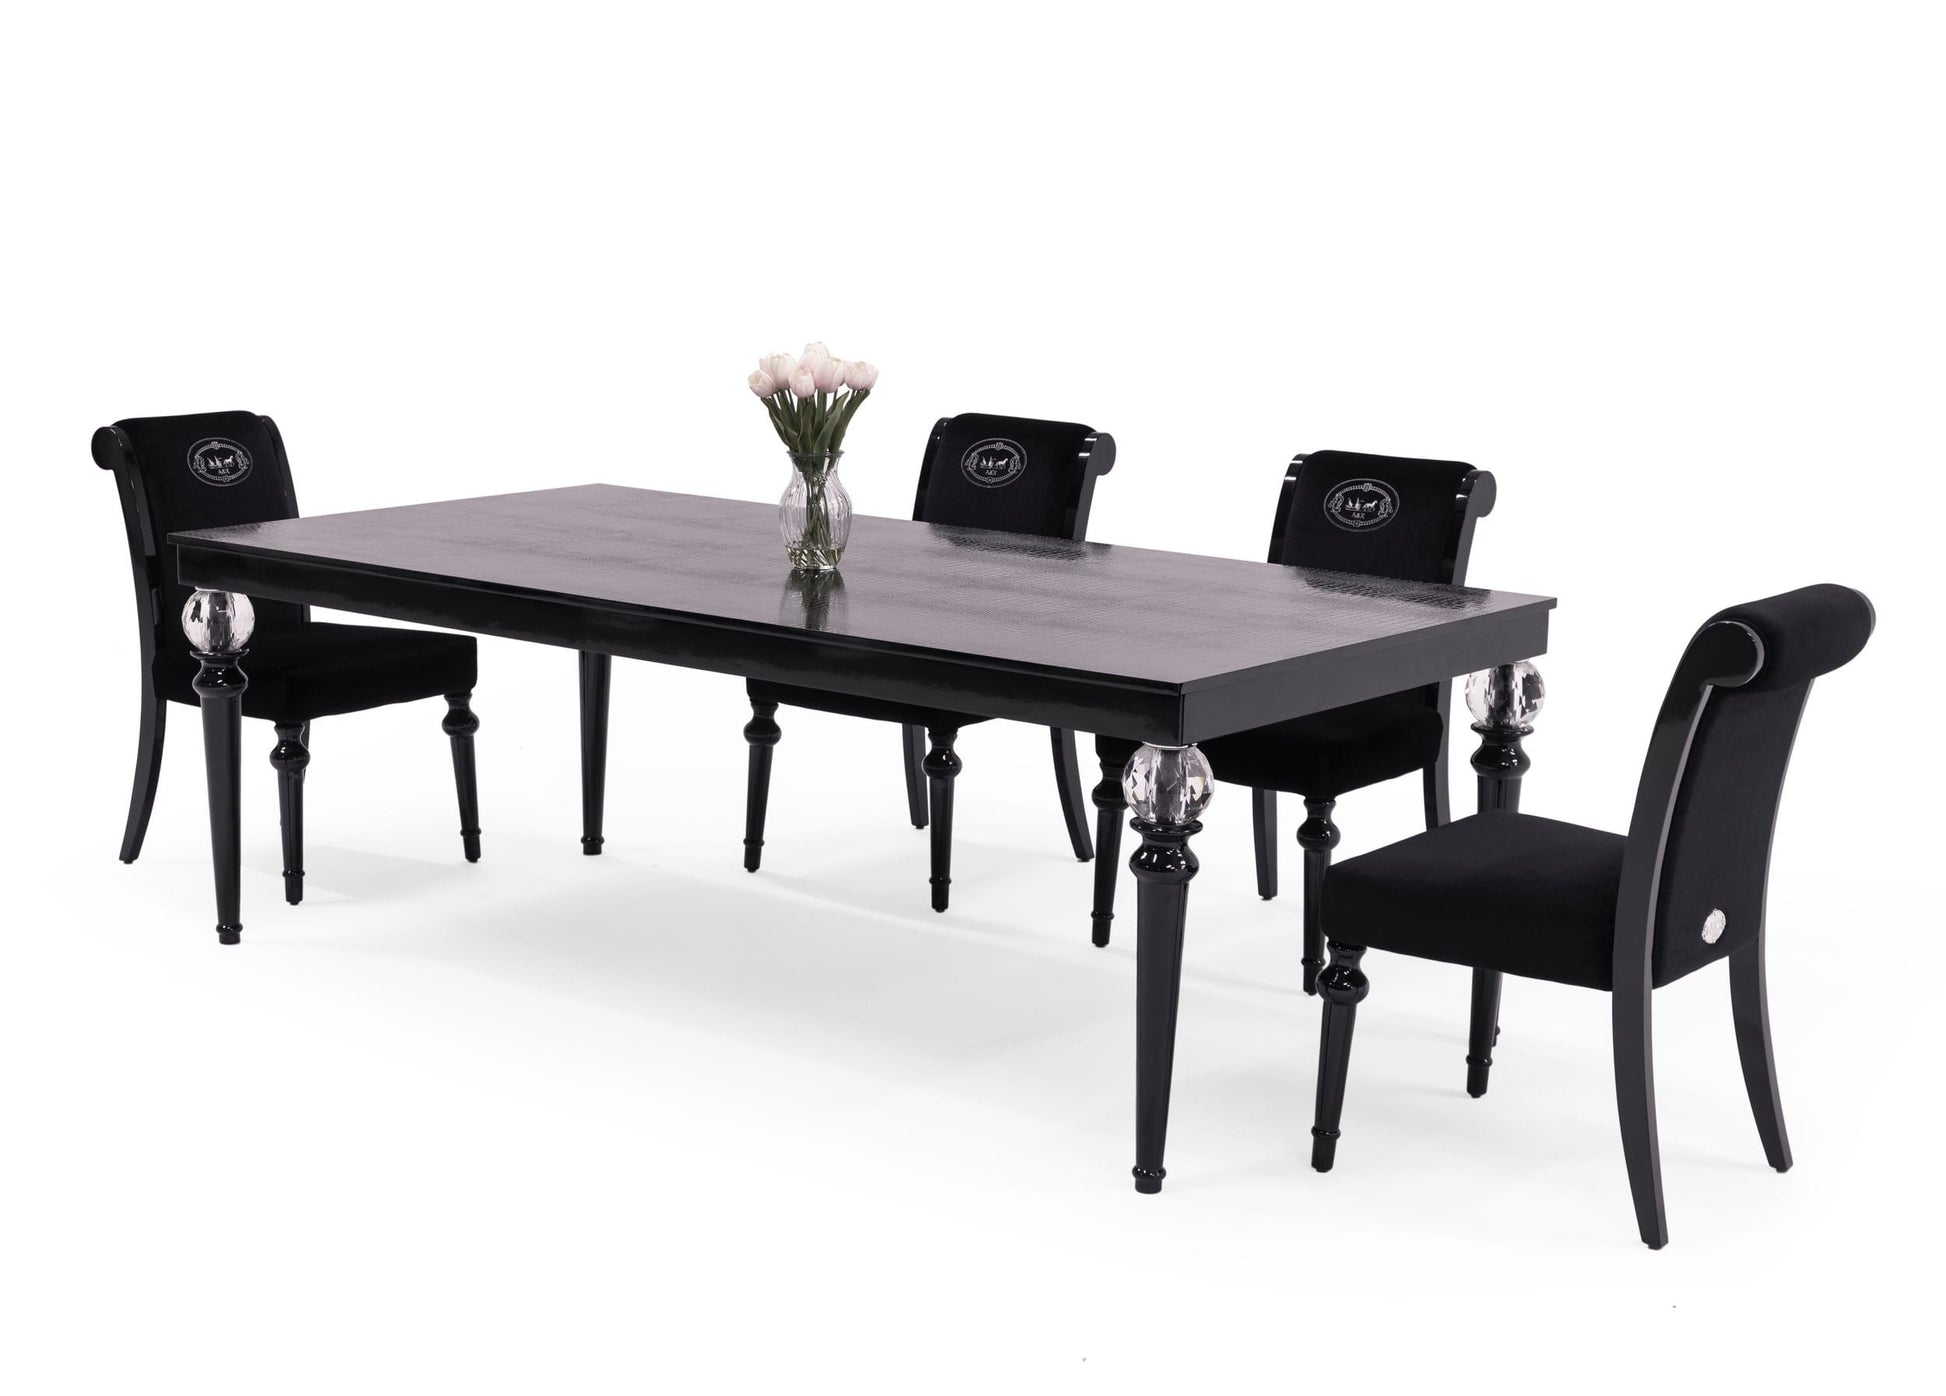 VIG Furniture AX Baccarat Black Crocodile Lacquer Crystal Dining Table